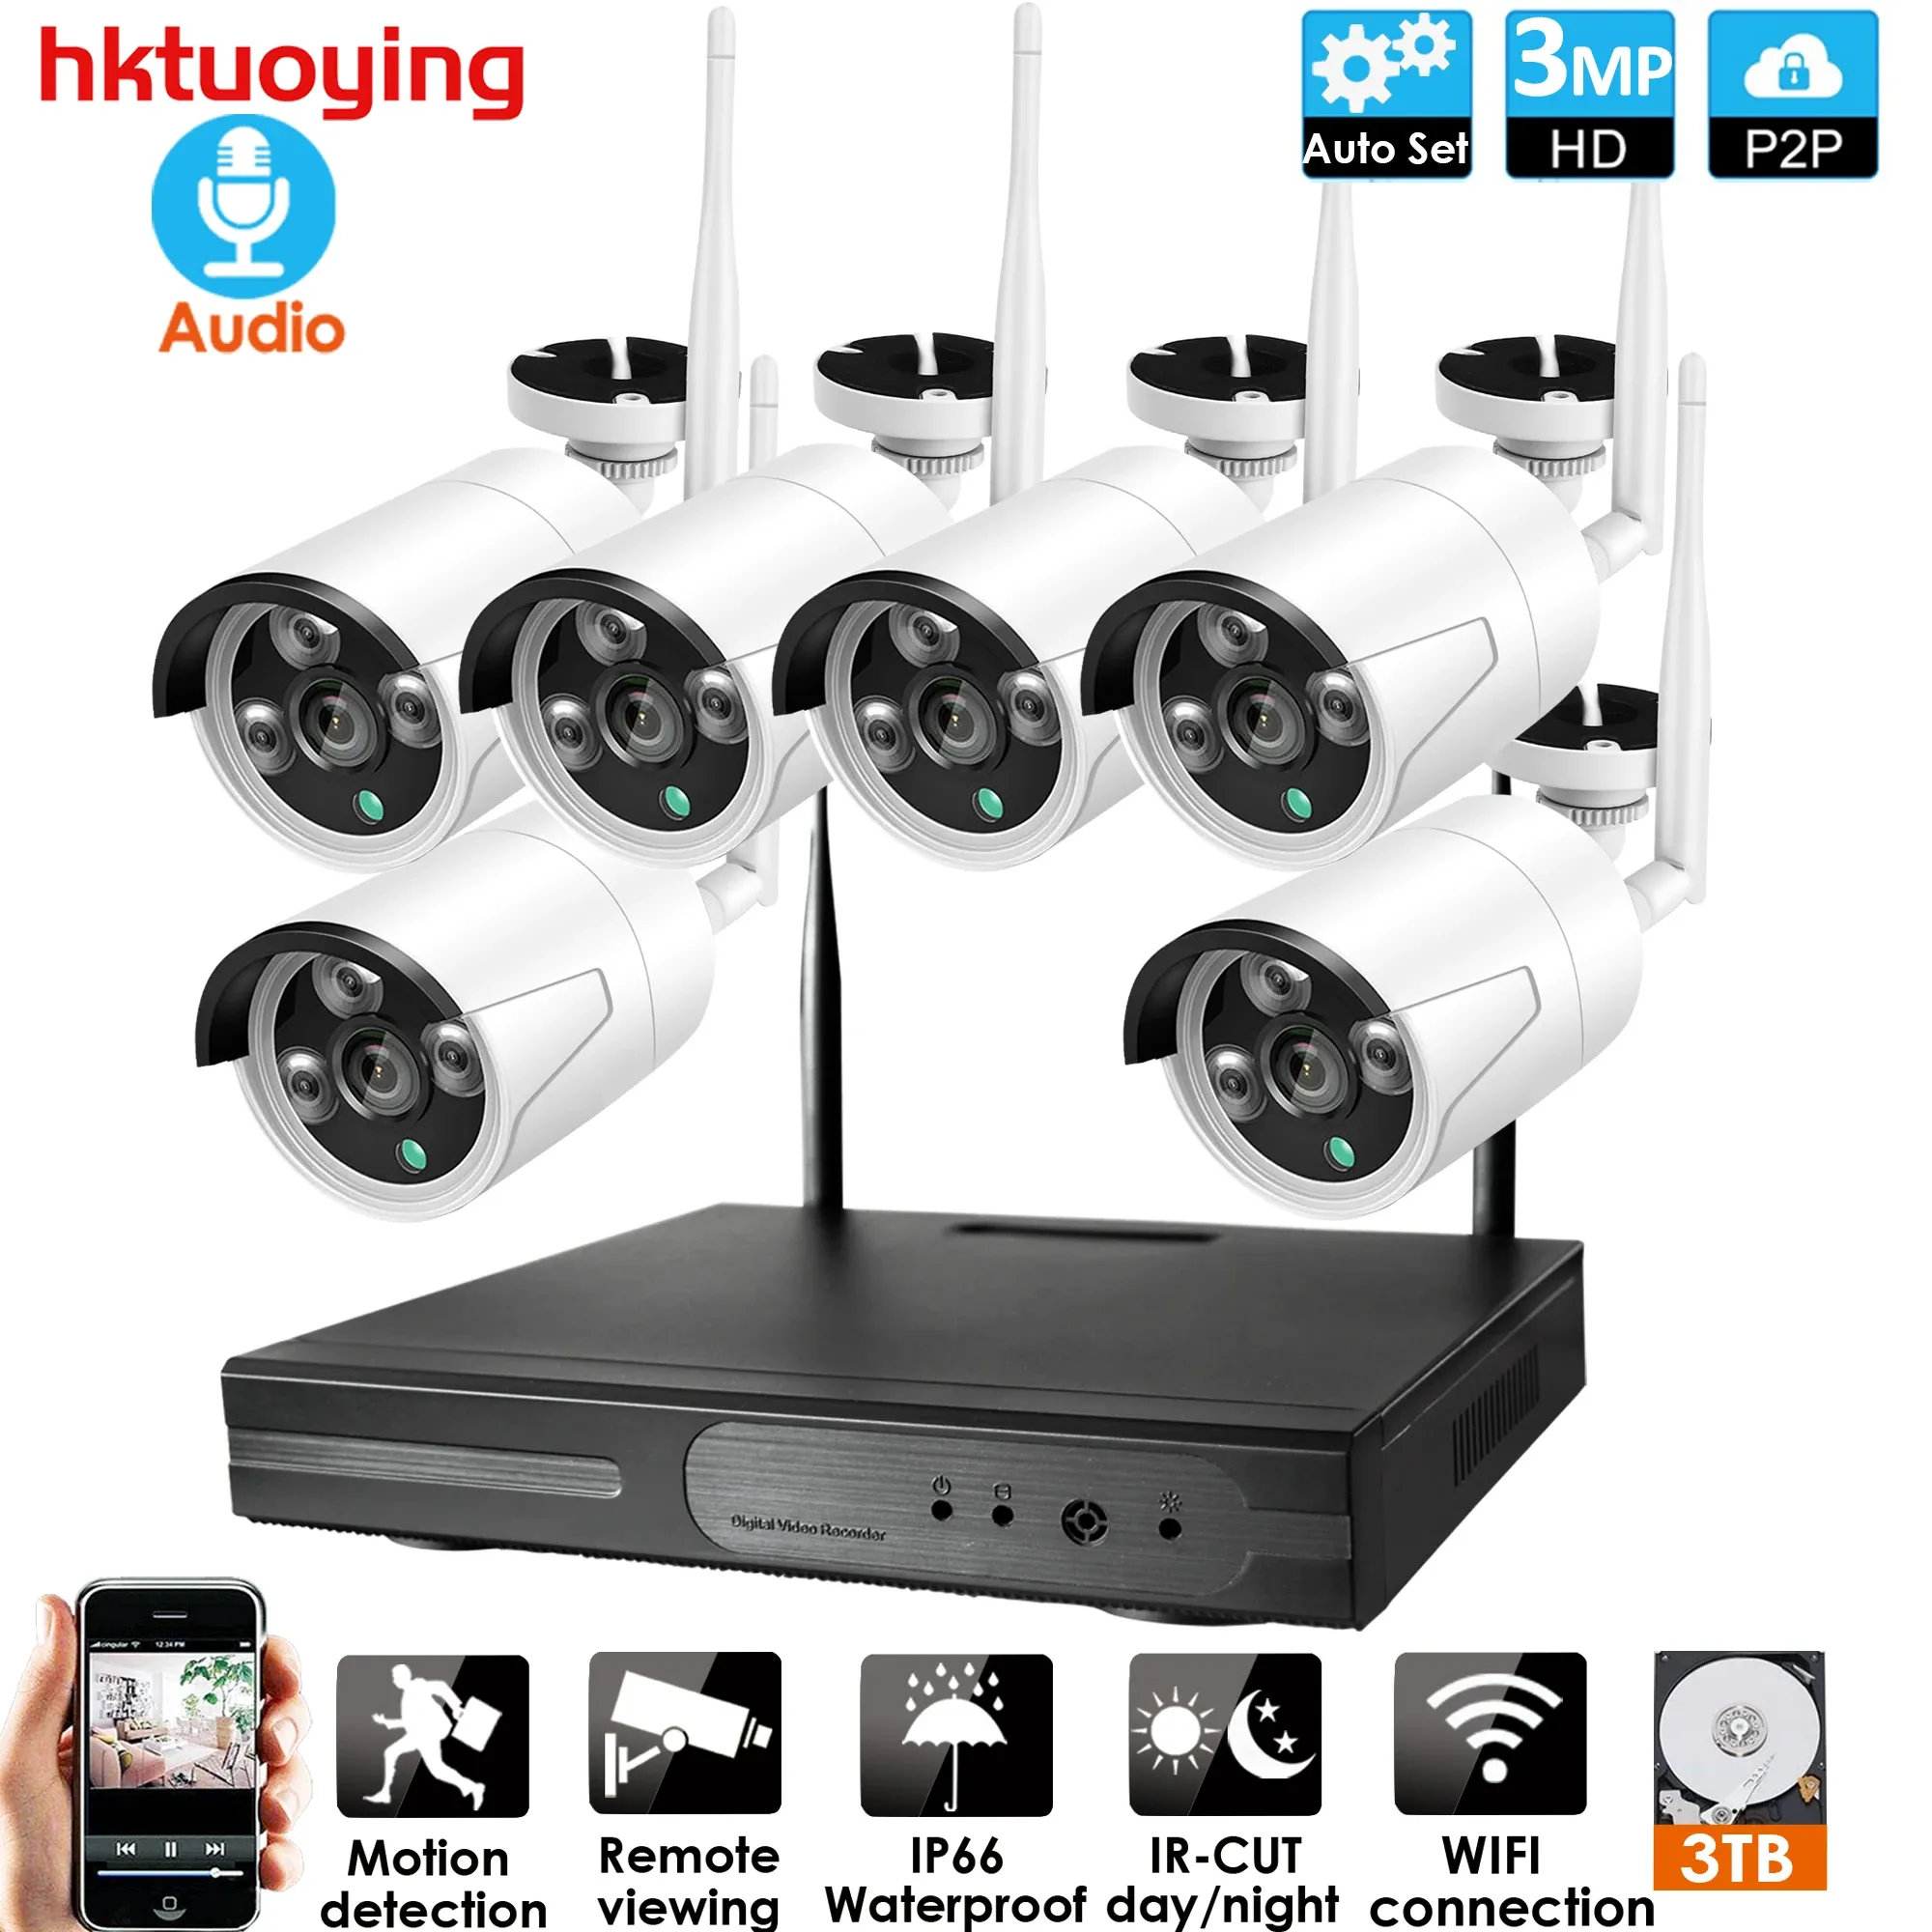 Système Plug et Play 6ch Audio 3MP HD Wireless NVR Kit P2P Indoor IR Night Vision Security 1080p IP Camera WiFi CCTV System